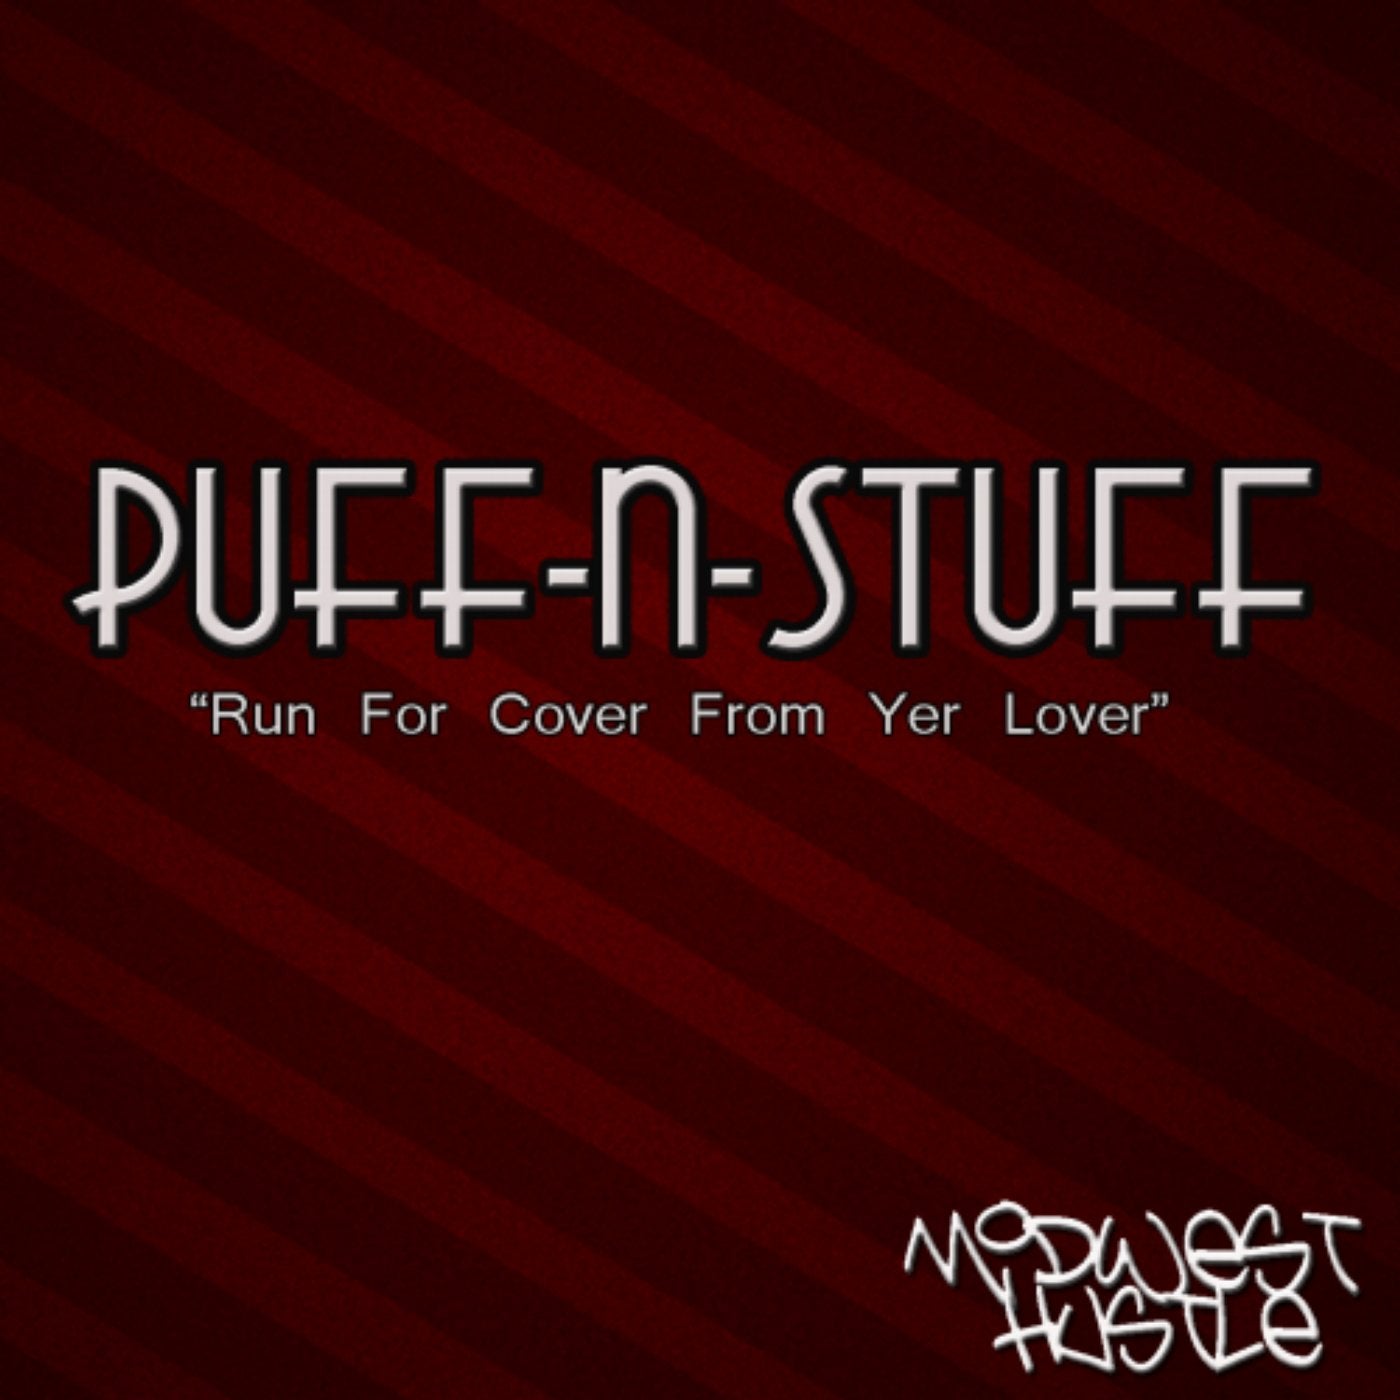 Run For Cover From Yer Lover